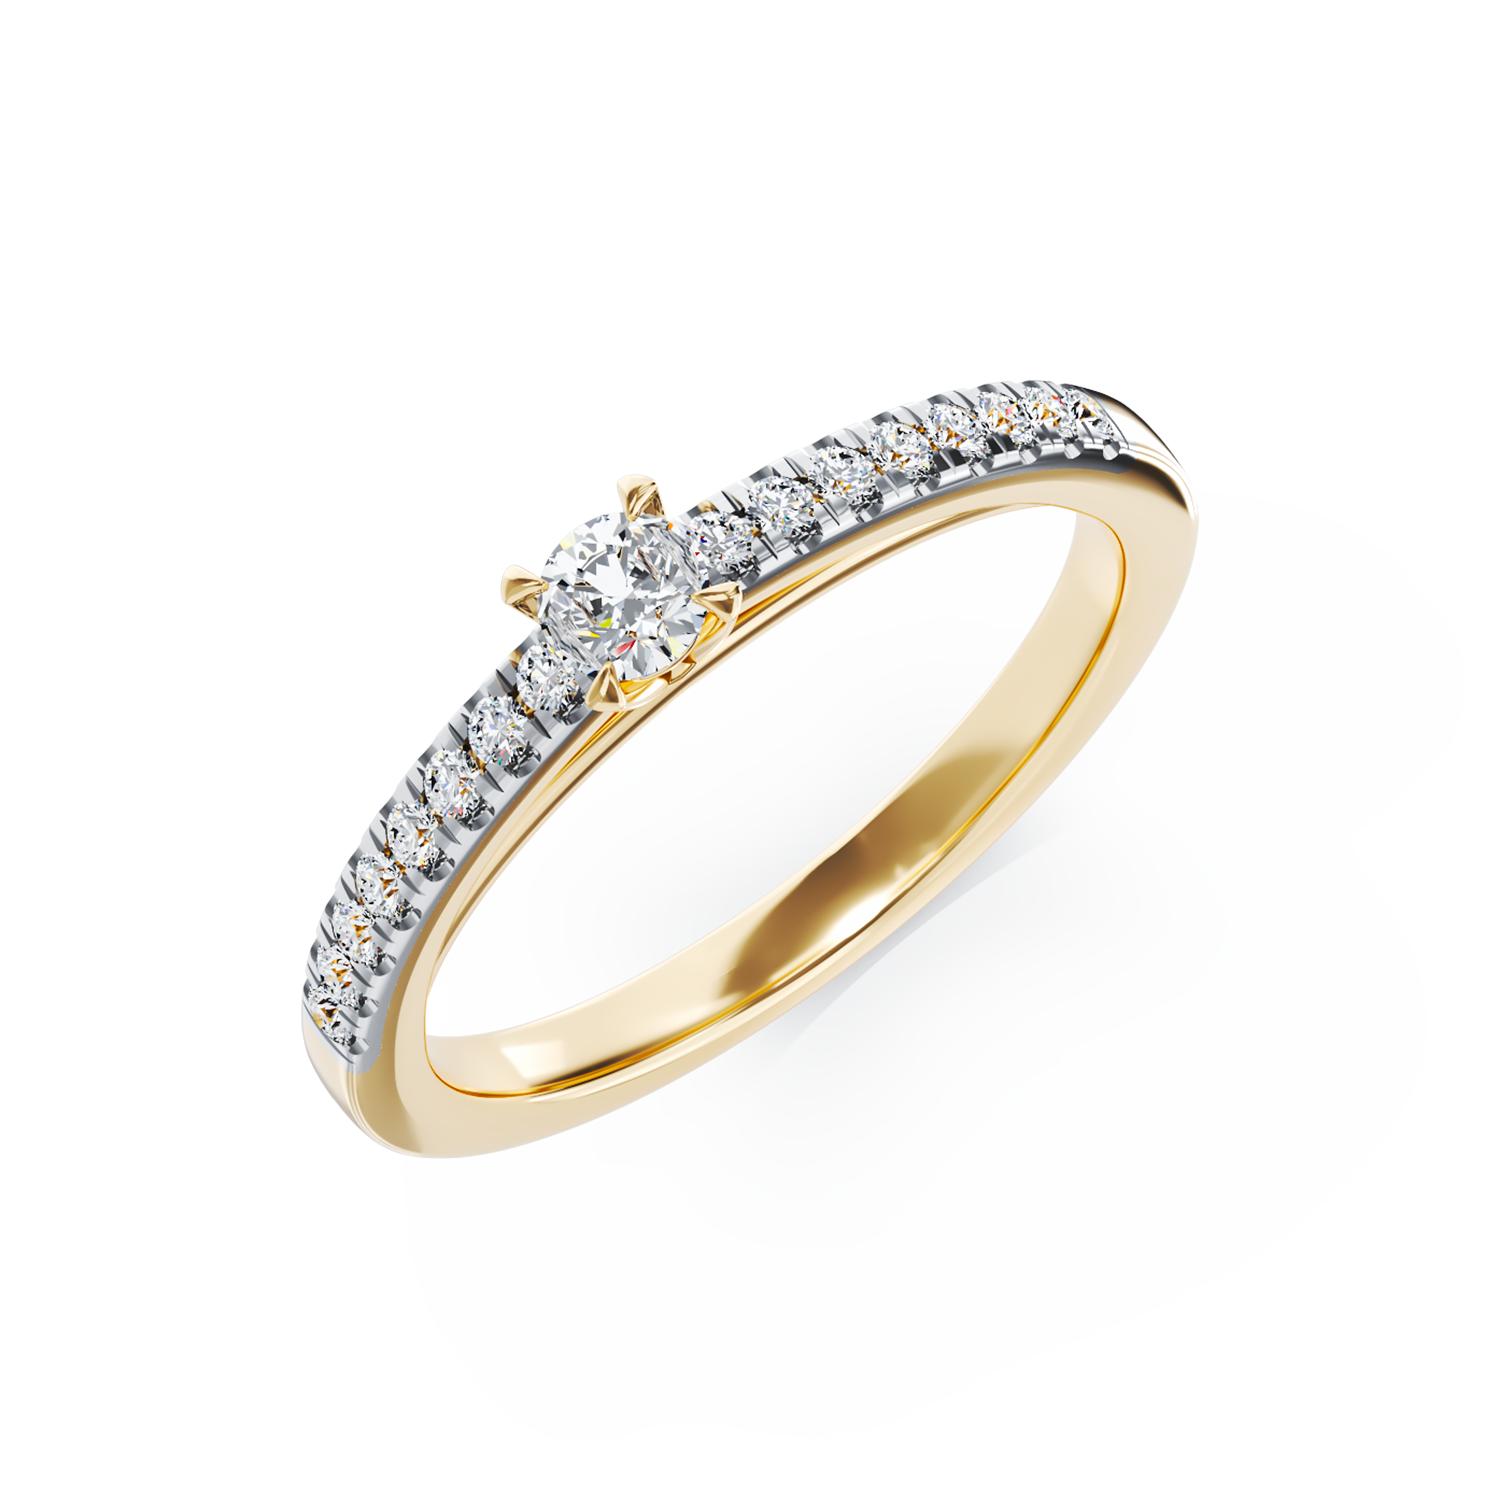 18K yellow gold engagement ring with 0.145ct diamond and 0.158ct diamonds